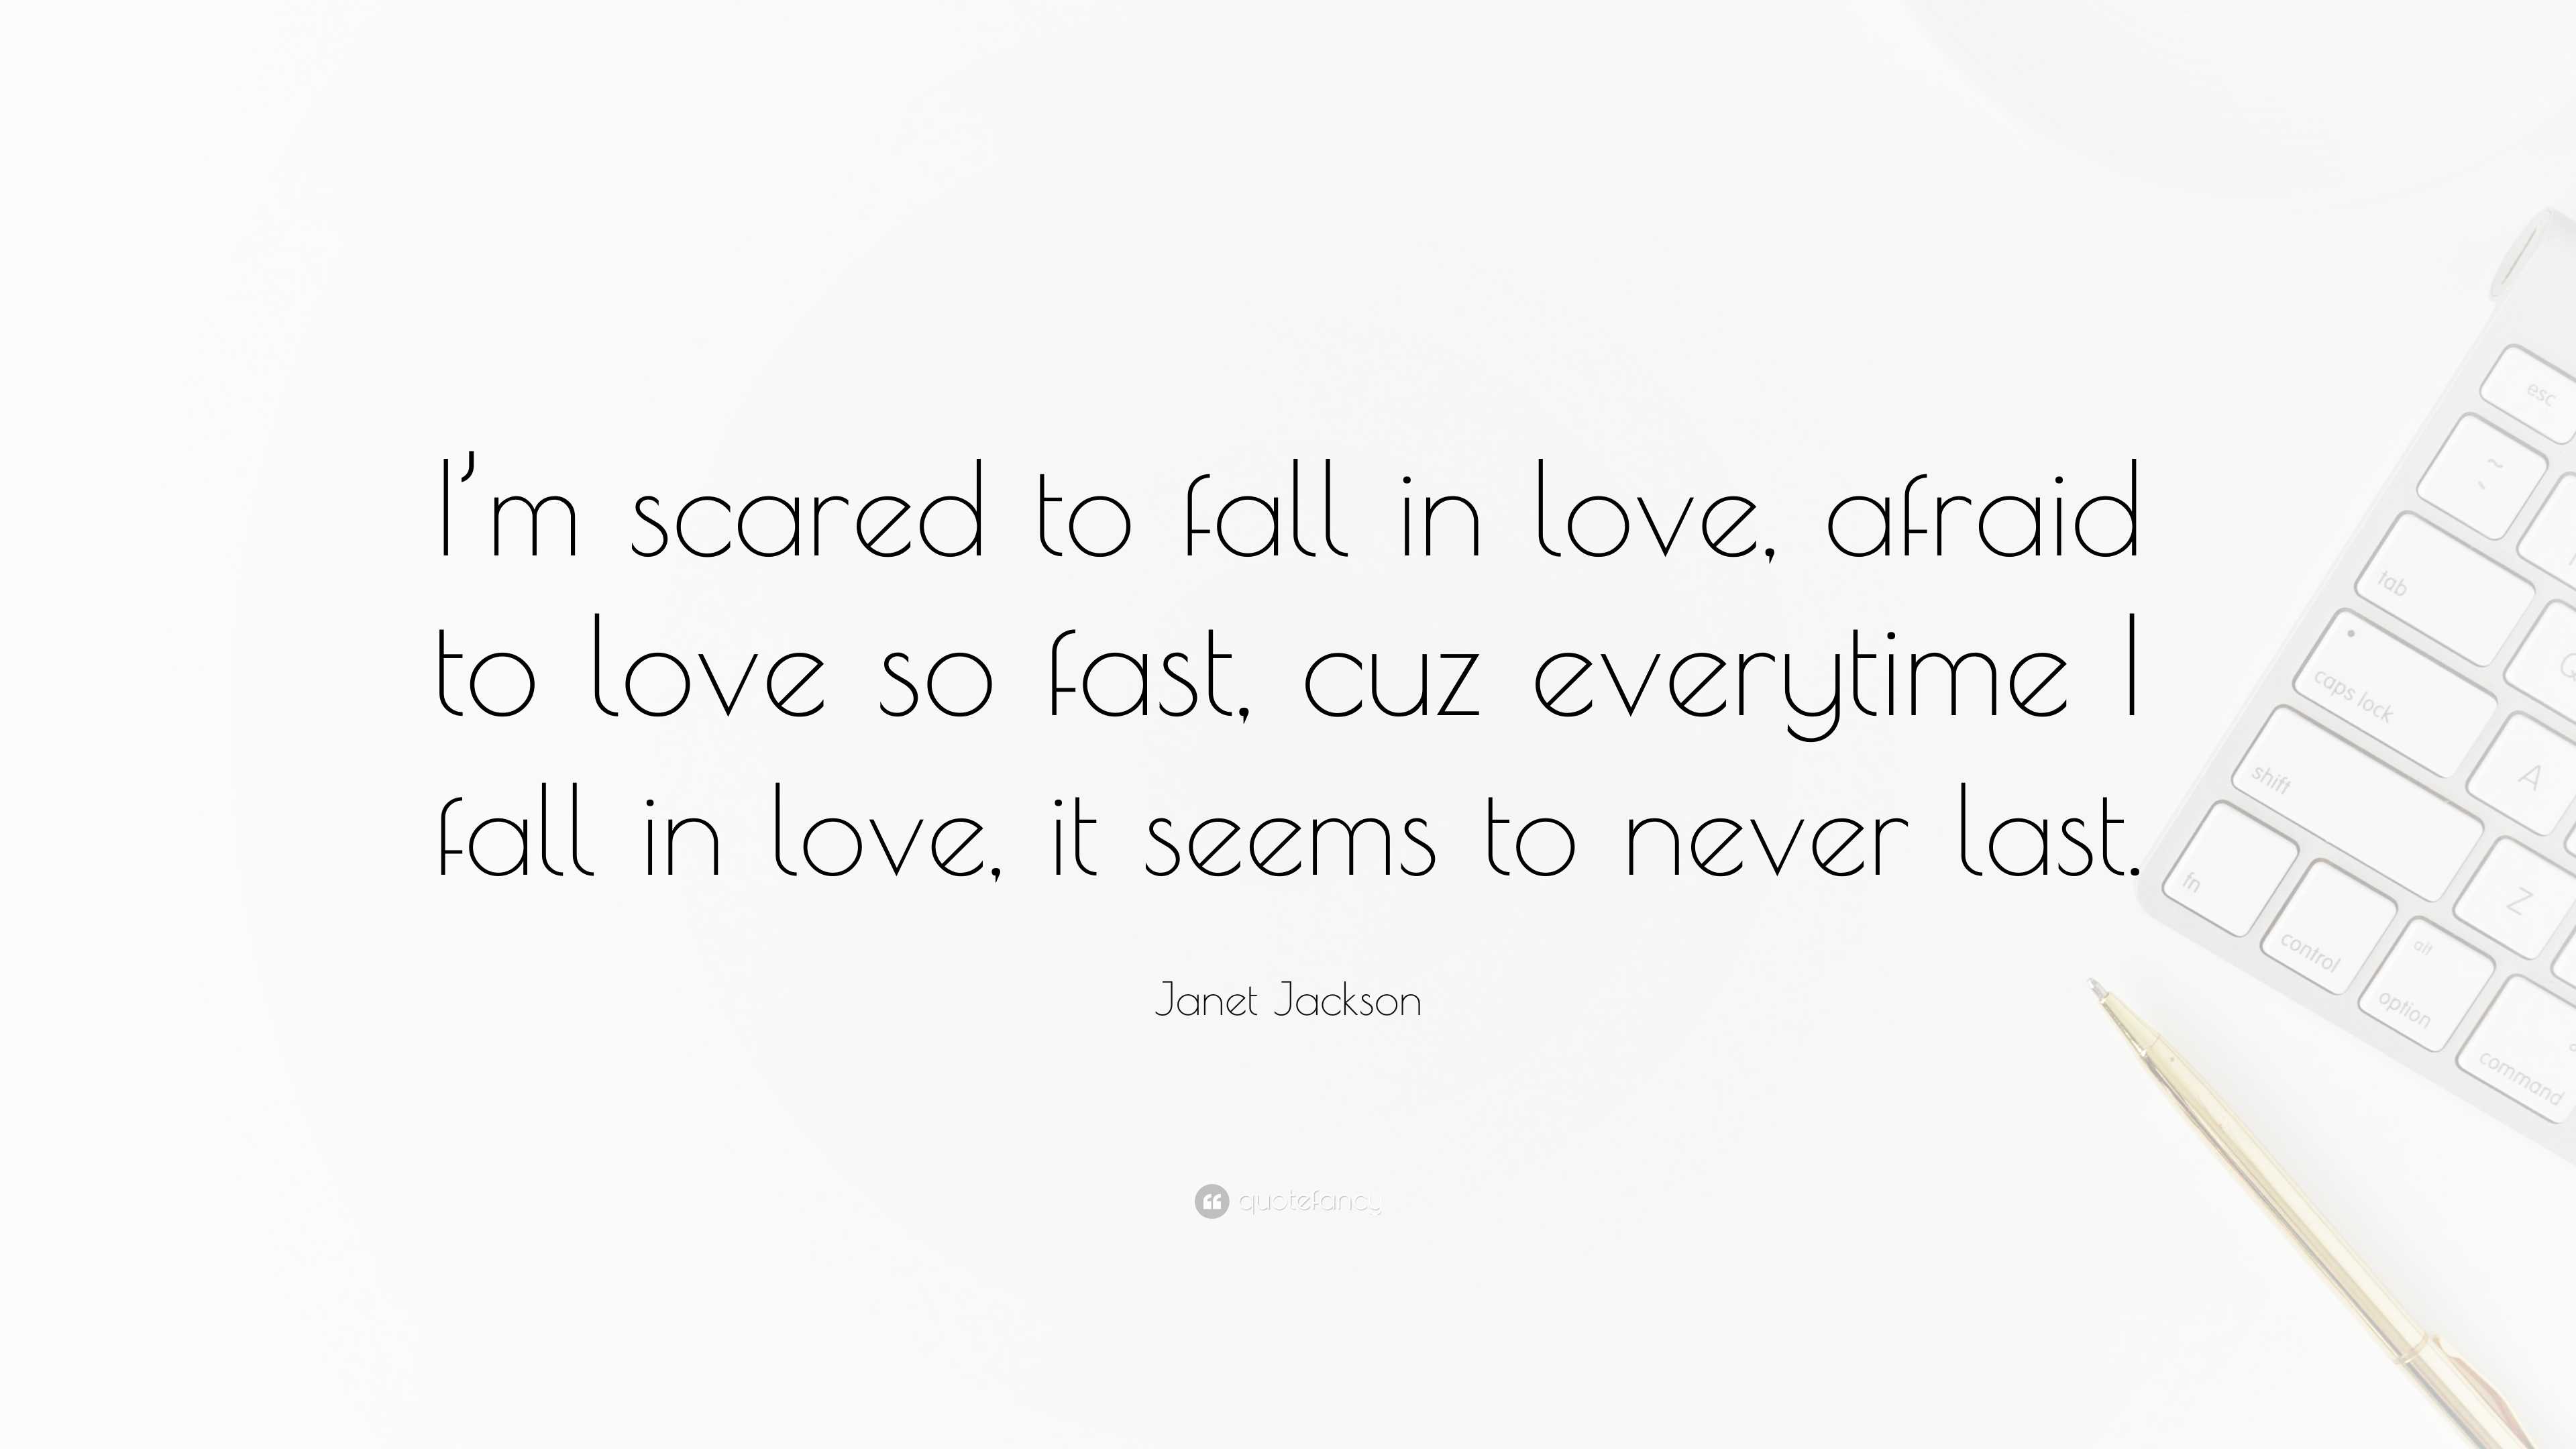 Janet Jackson Quote: “I'm scared to fall in love, afraid to love so fast,  cuz